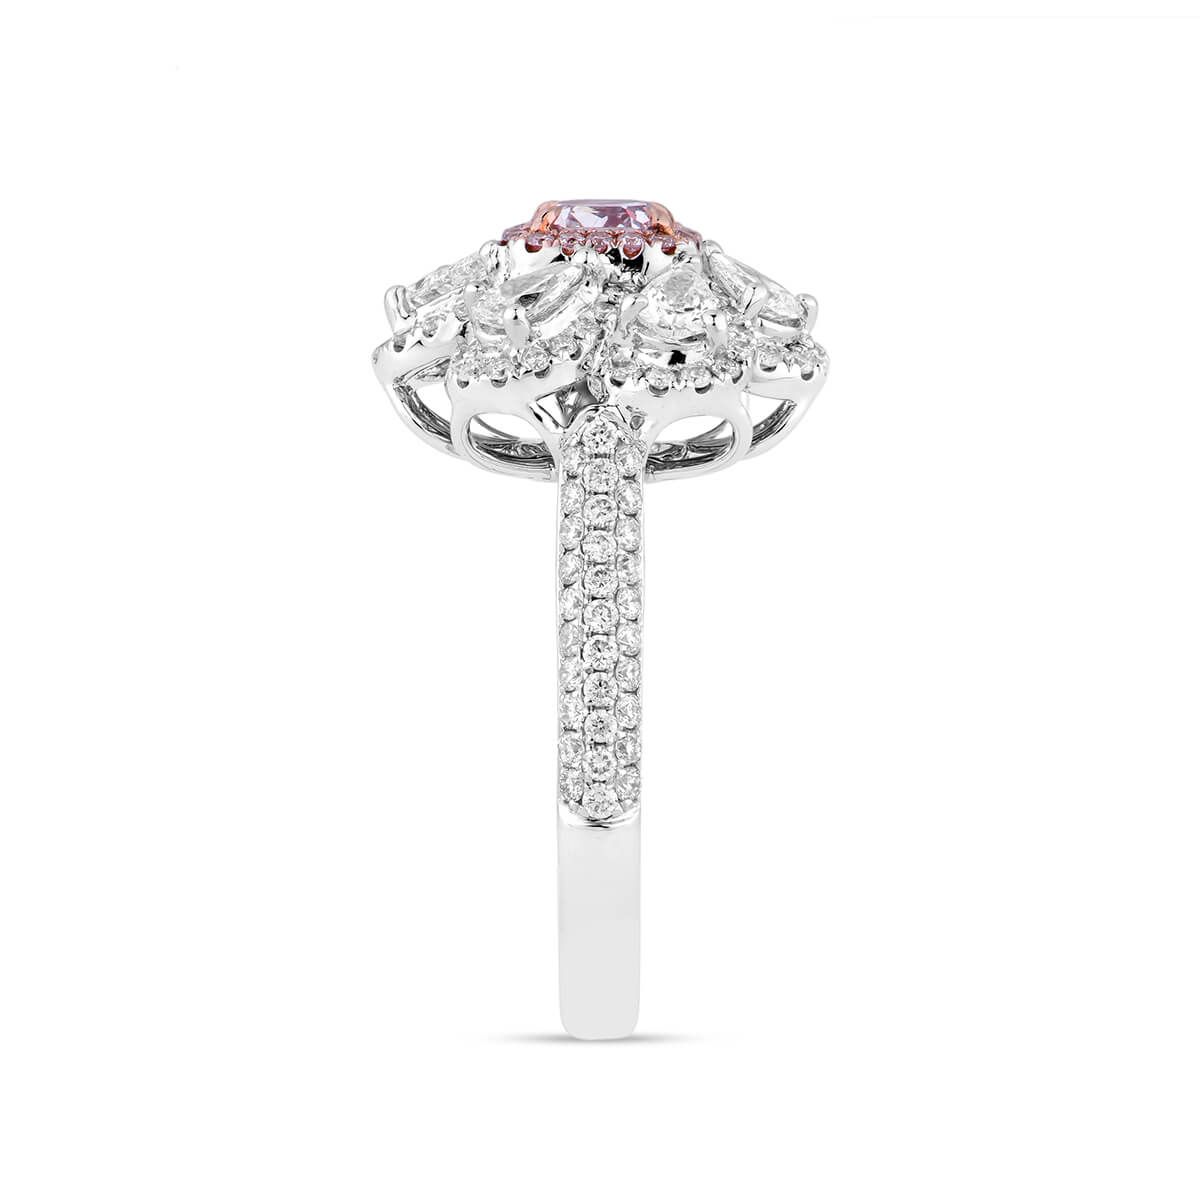 Very Light Pink Diamond Ring, 0.40 Ct. (1.53 Ct. TW), Radiant shape, GIA Certified, 1159172814